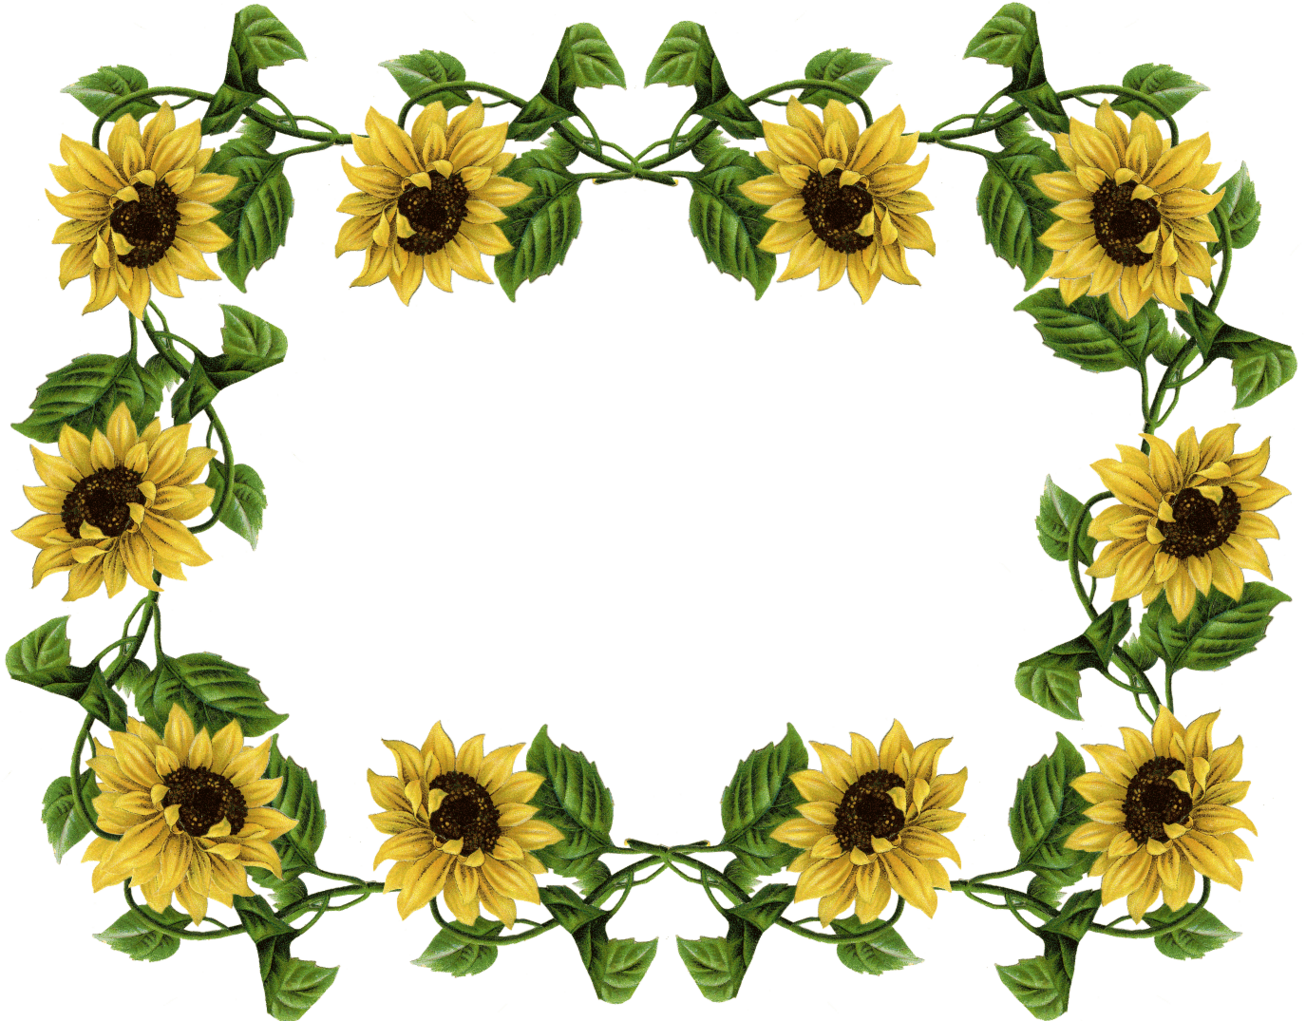 Flower Frame Border Clipart - Free to use Clip Art Resource